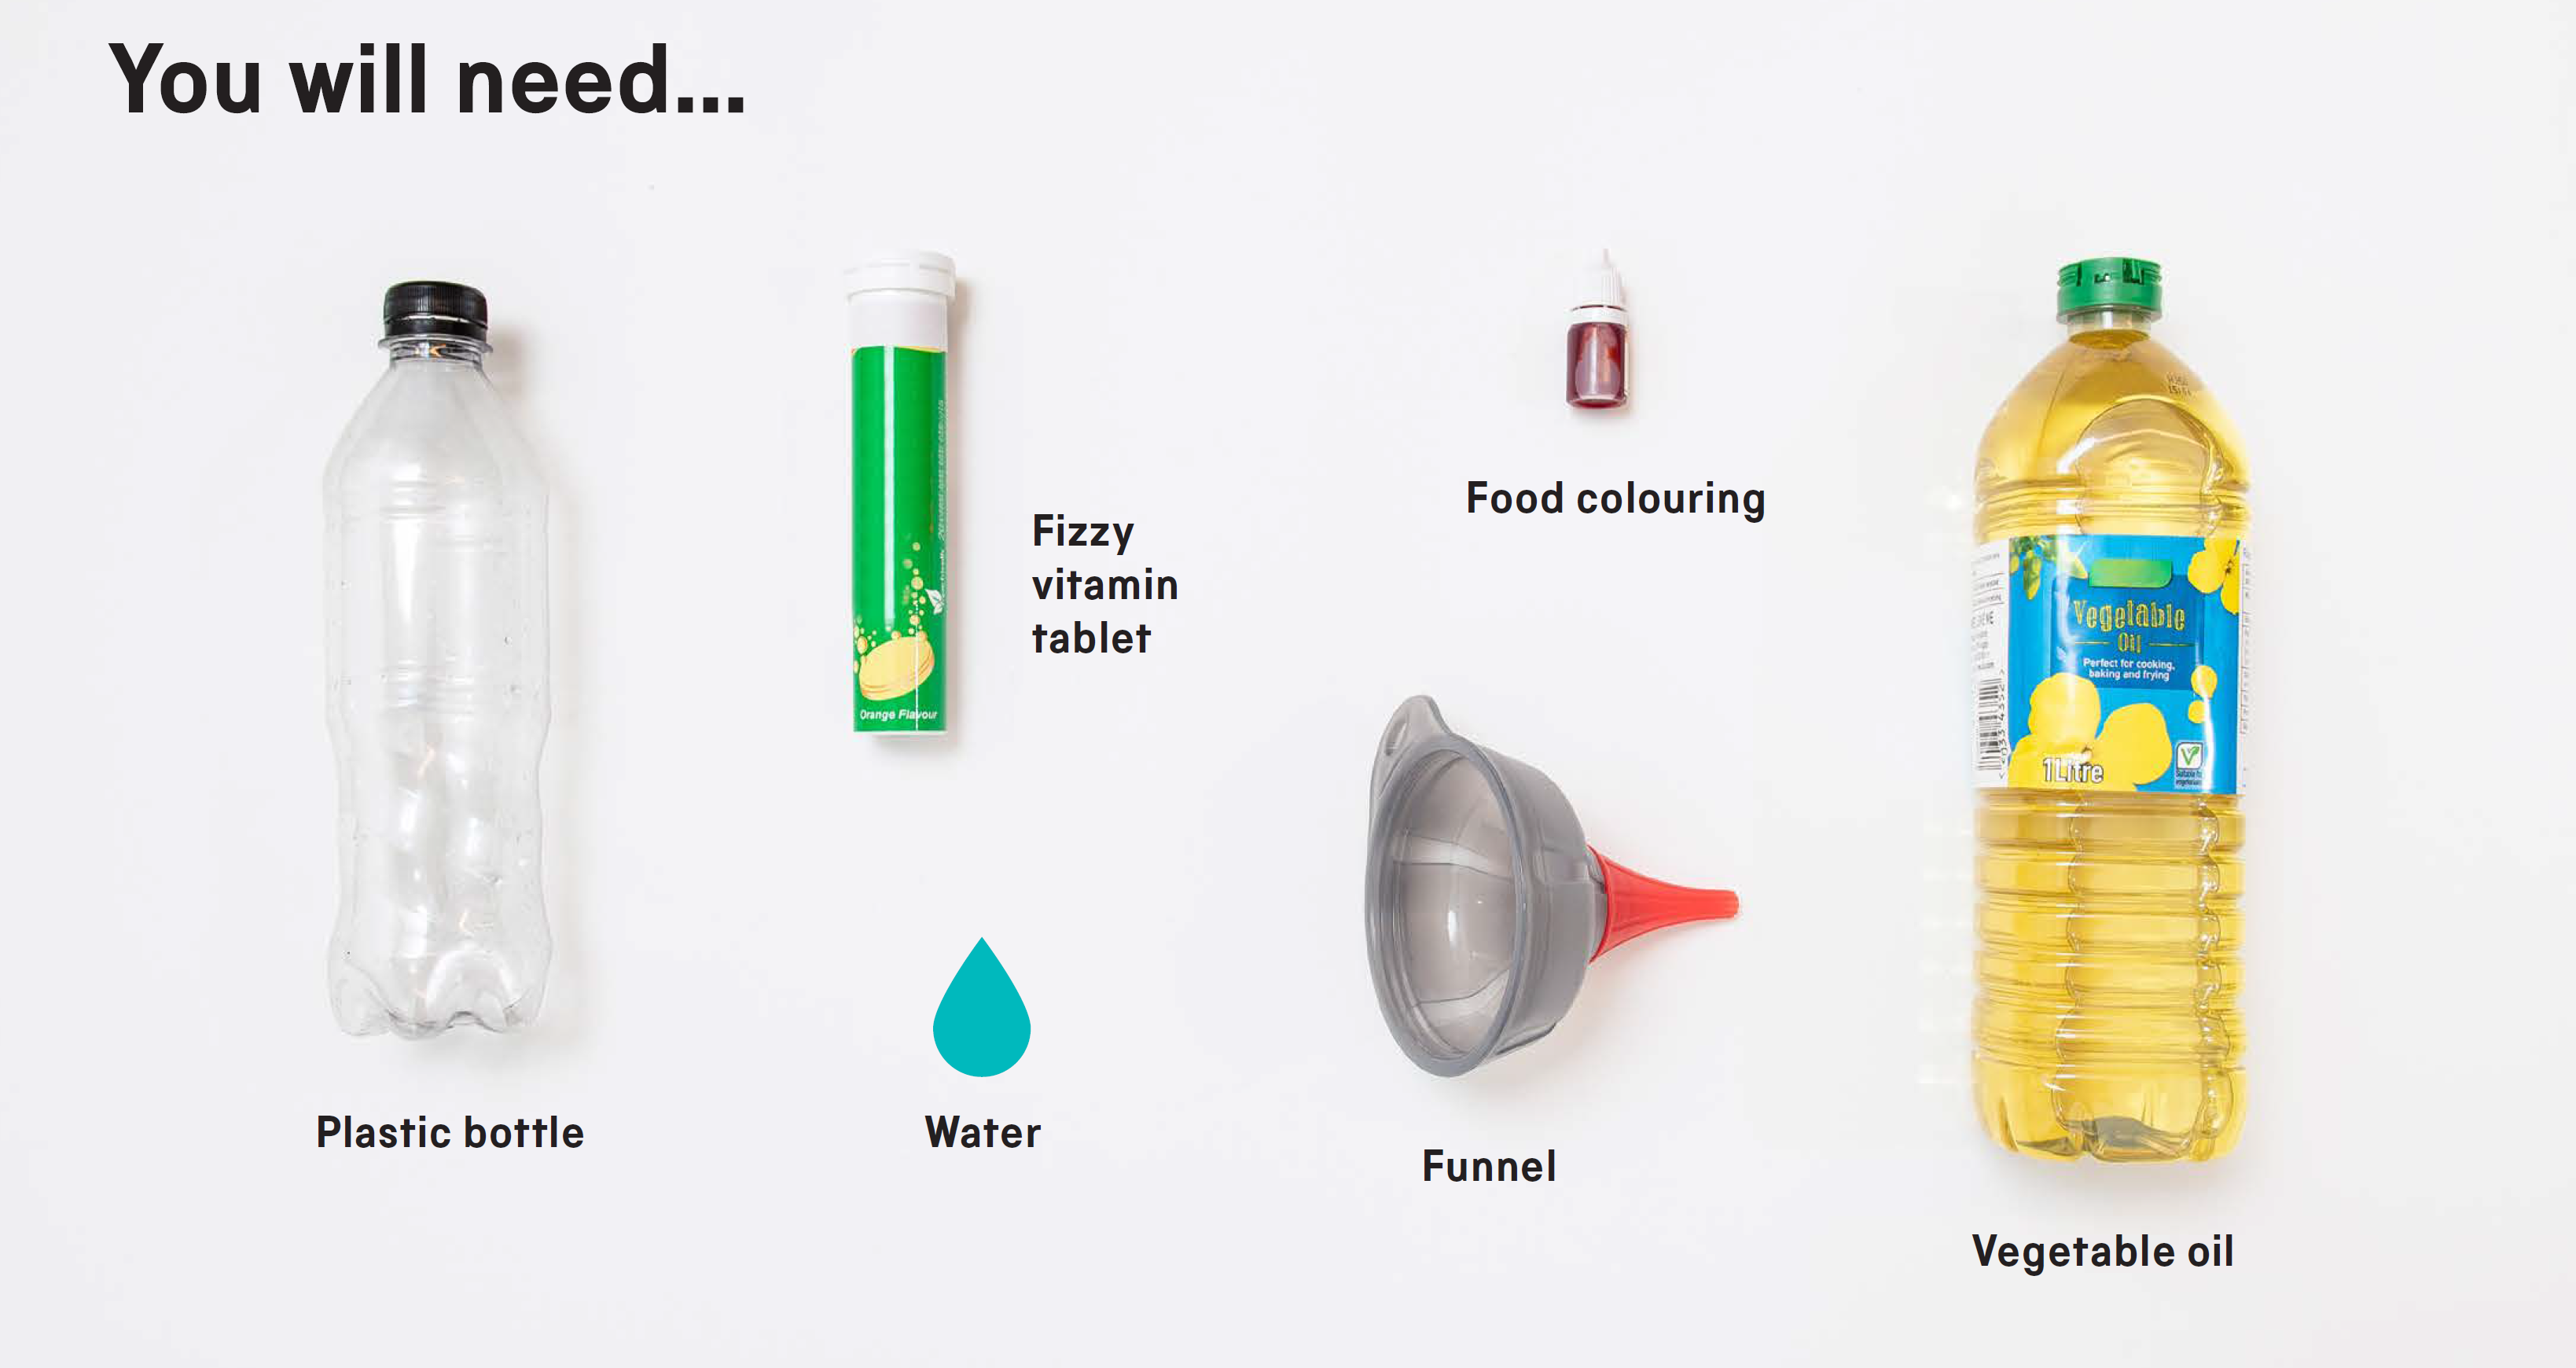 You will need: a re-useable plastic bottle, a fizzy vitamin tablet, food colouring, water, funnel (or rolled-up piece of paper) and vegetable oil.